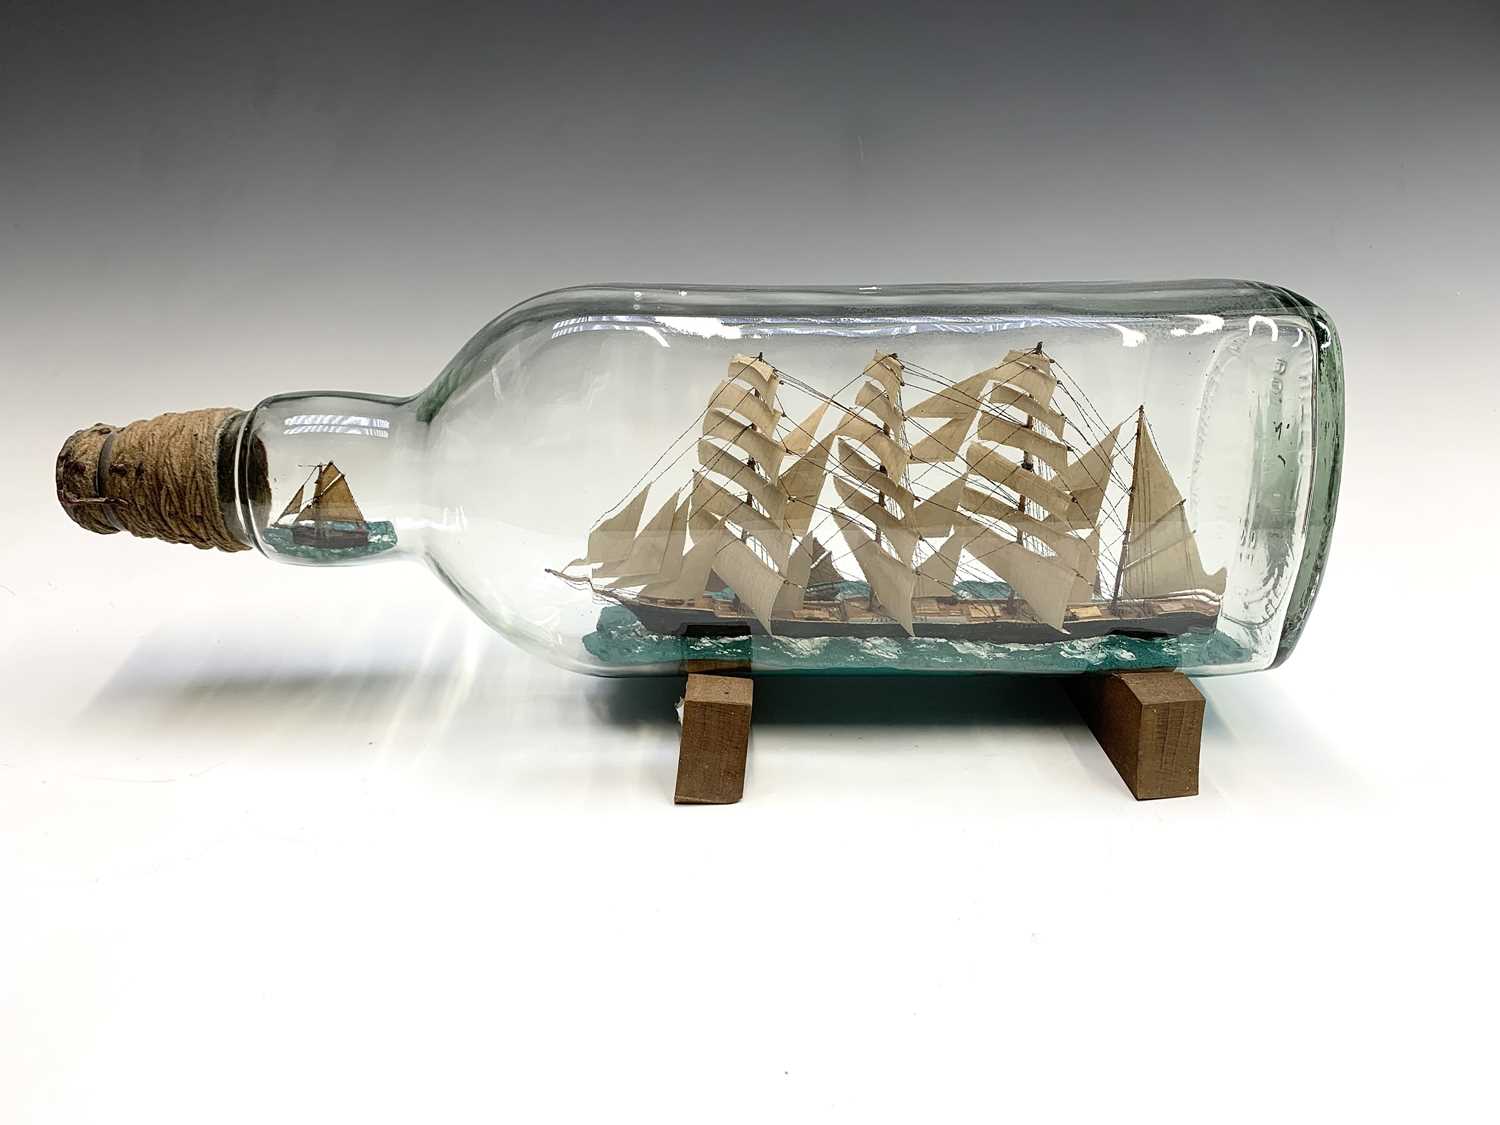 Mark Penrose, a large model ship in bottle, with a four master schooner, with a further fishing boat